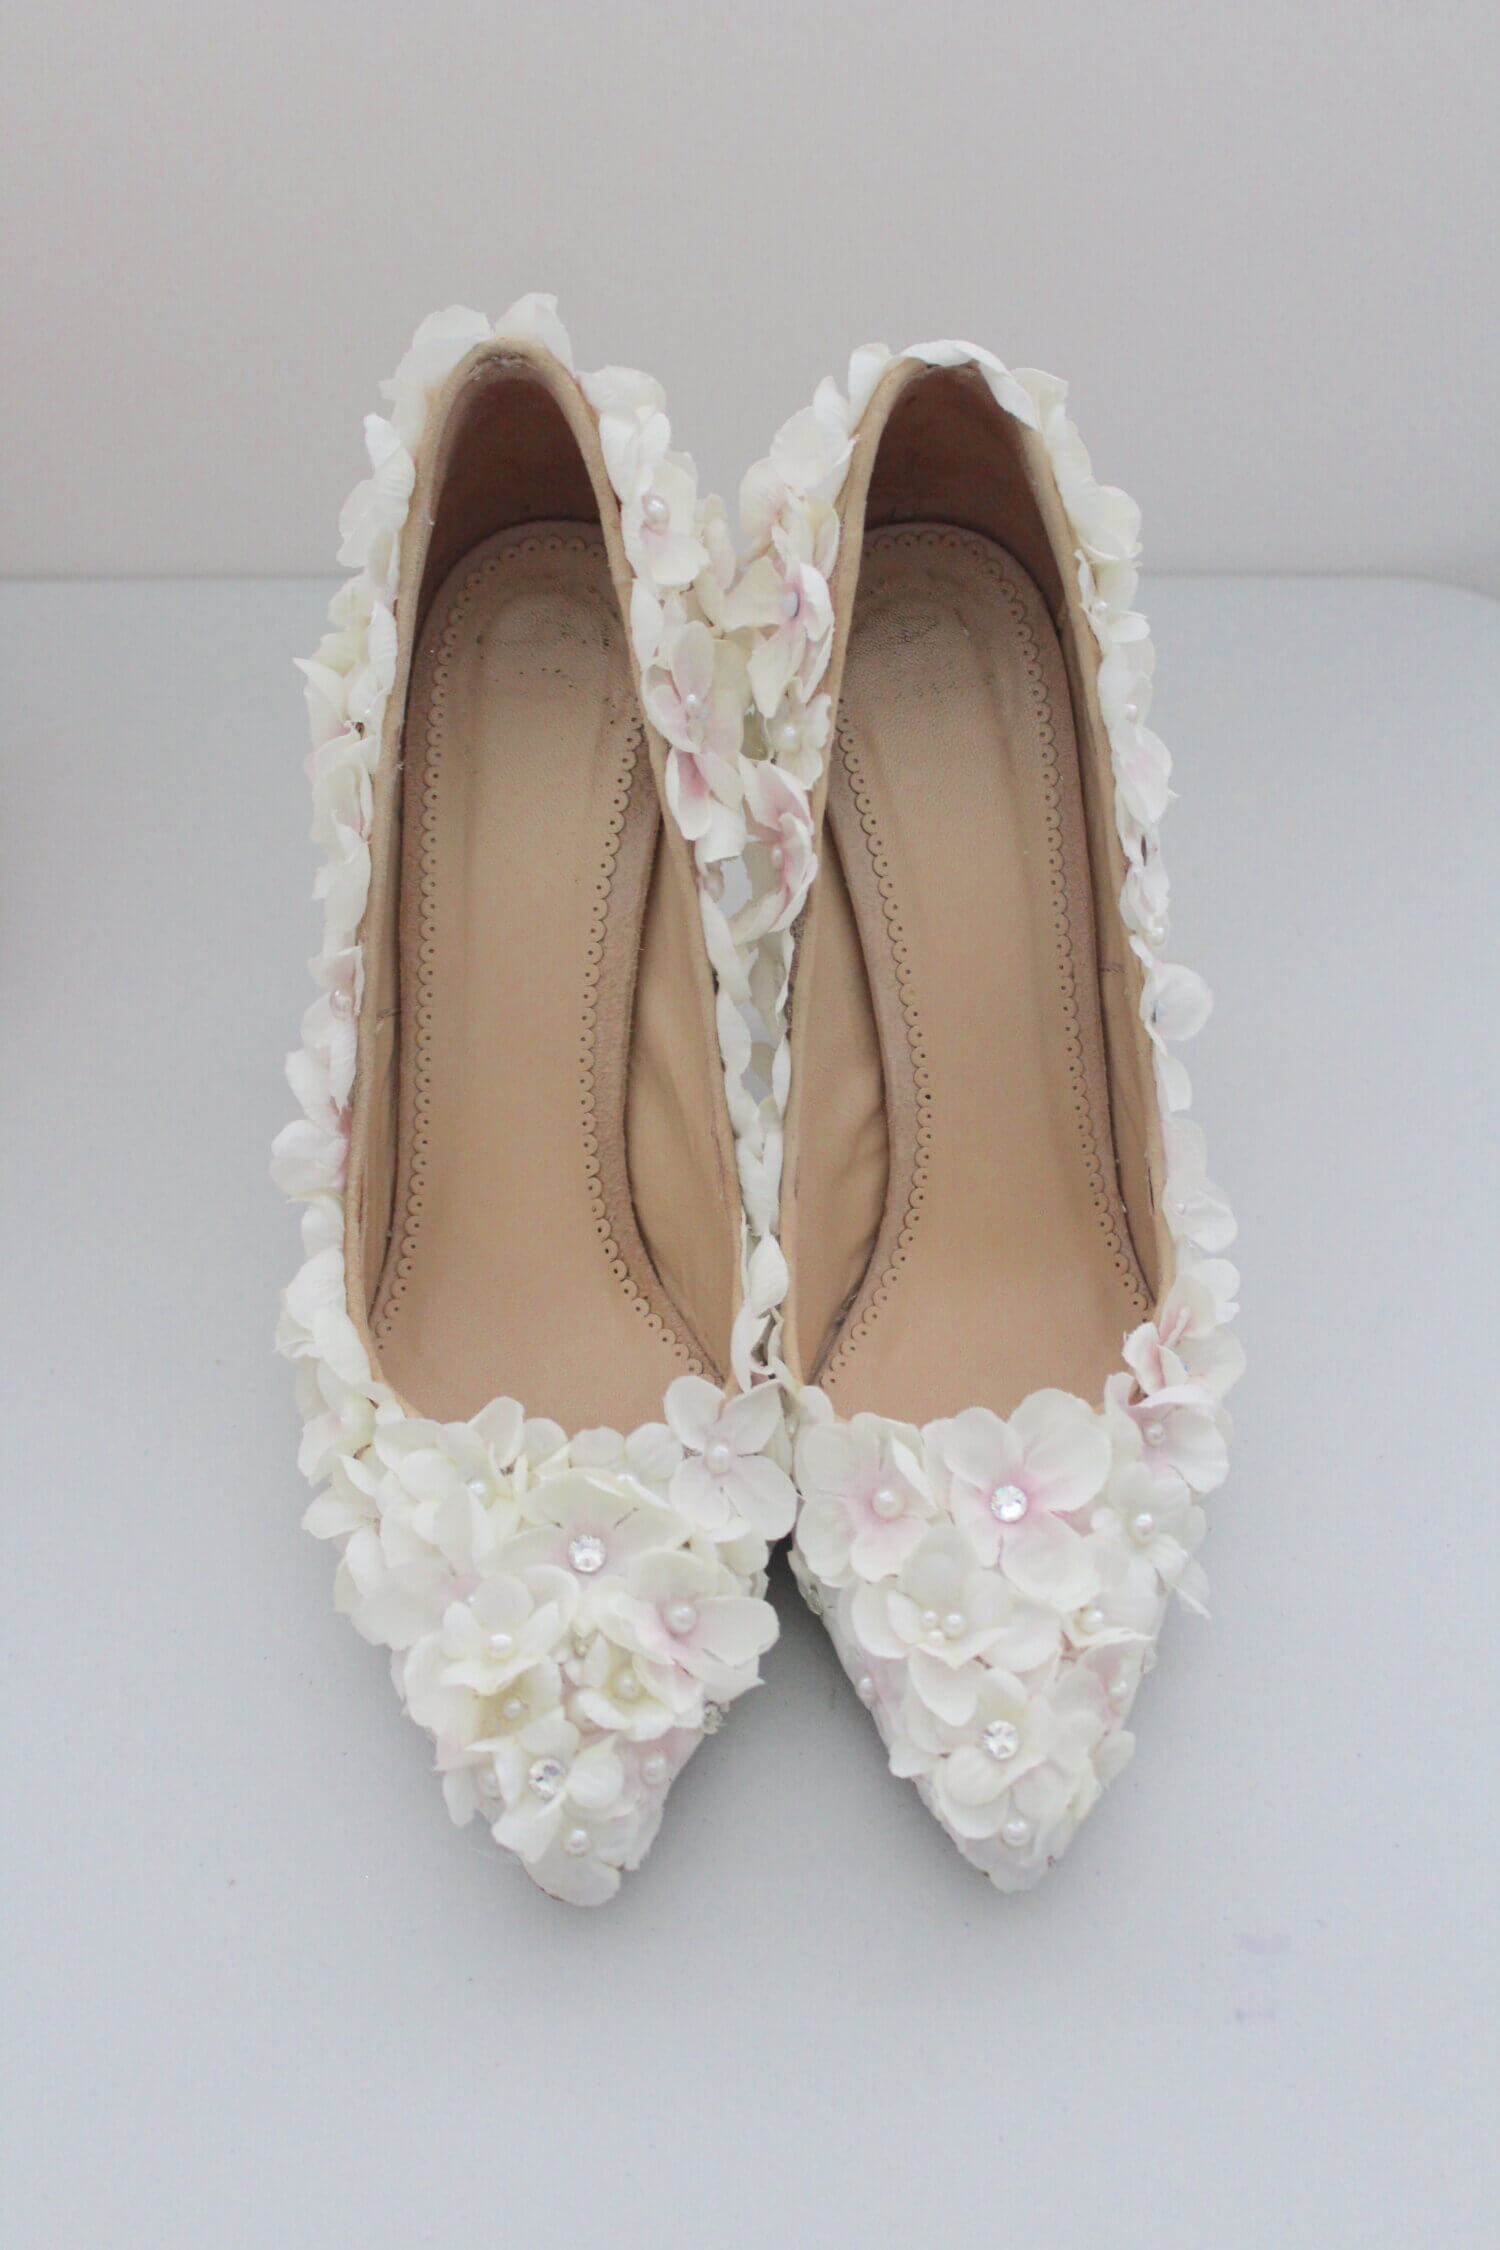 Ivory. floral covered shoes with pearls